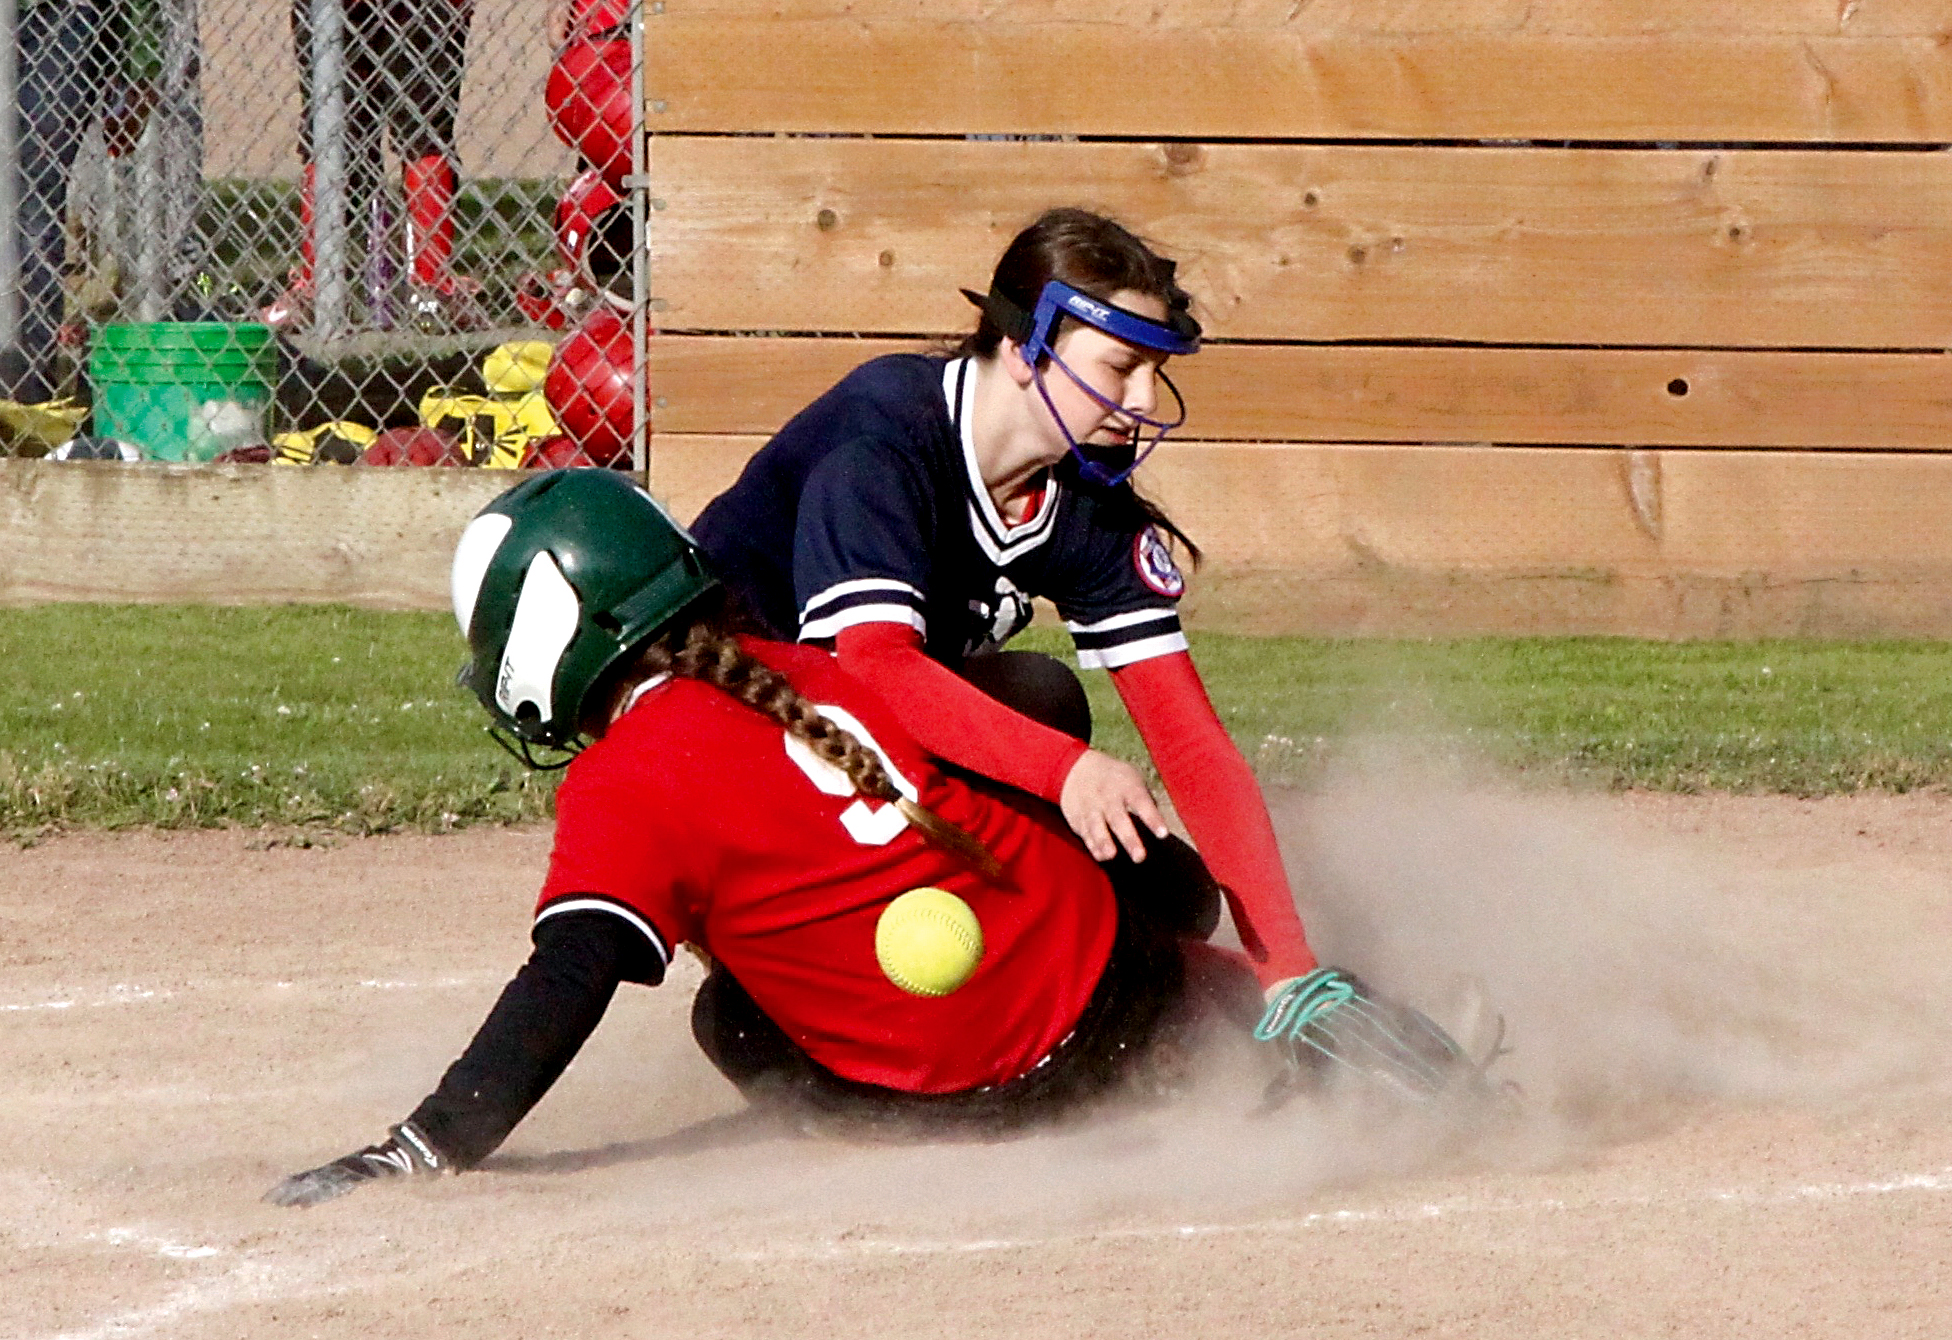 Jim's Pharmacy's Taylor Worthington slides into home as a throw bounces away from Paint and Carpet Barn pitcher Destiny Smith in the 12U softball city championship game at Lincoln Park in Port Angeles. Paint and Carpet won 14-2. (Dave Logan/for Peninsula Daily News)